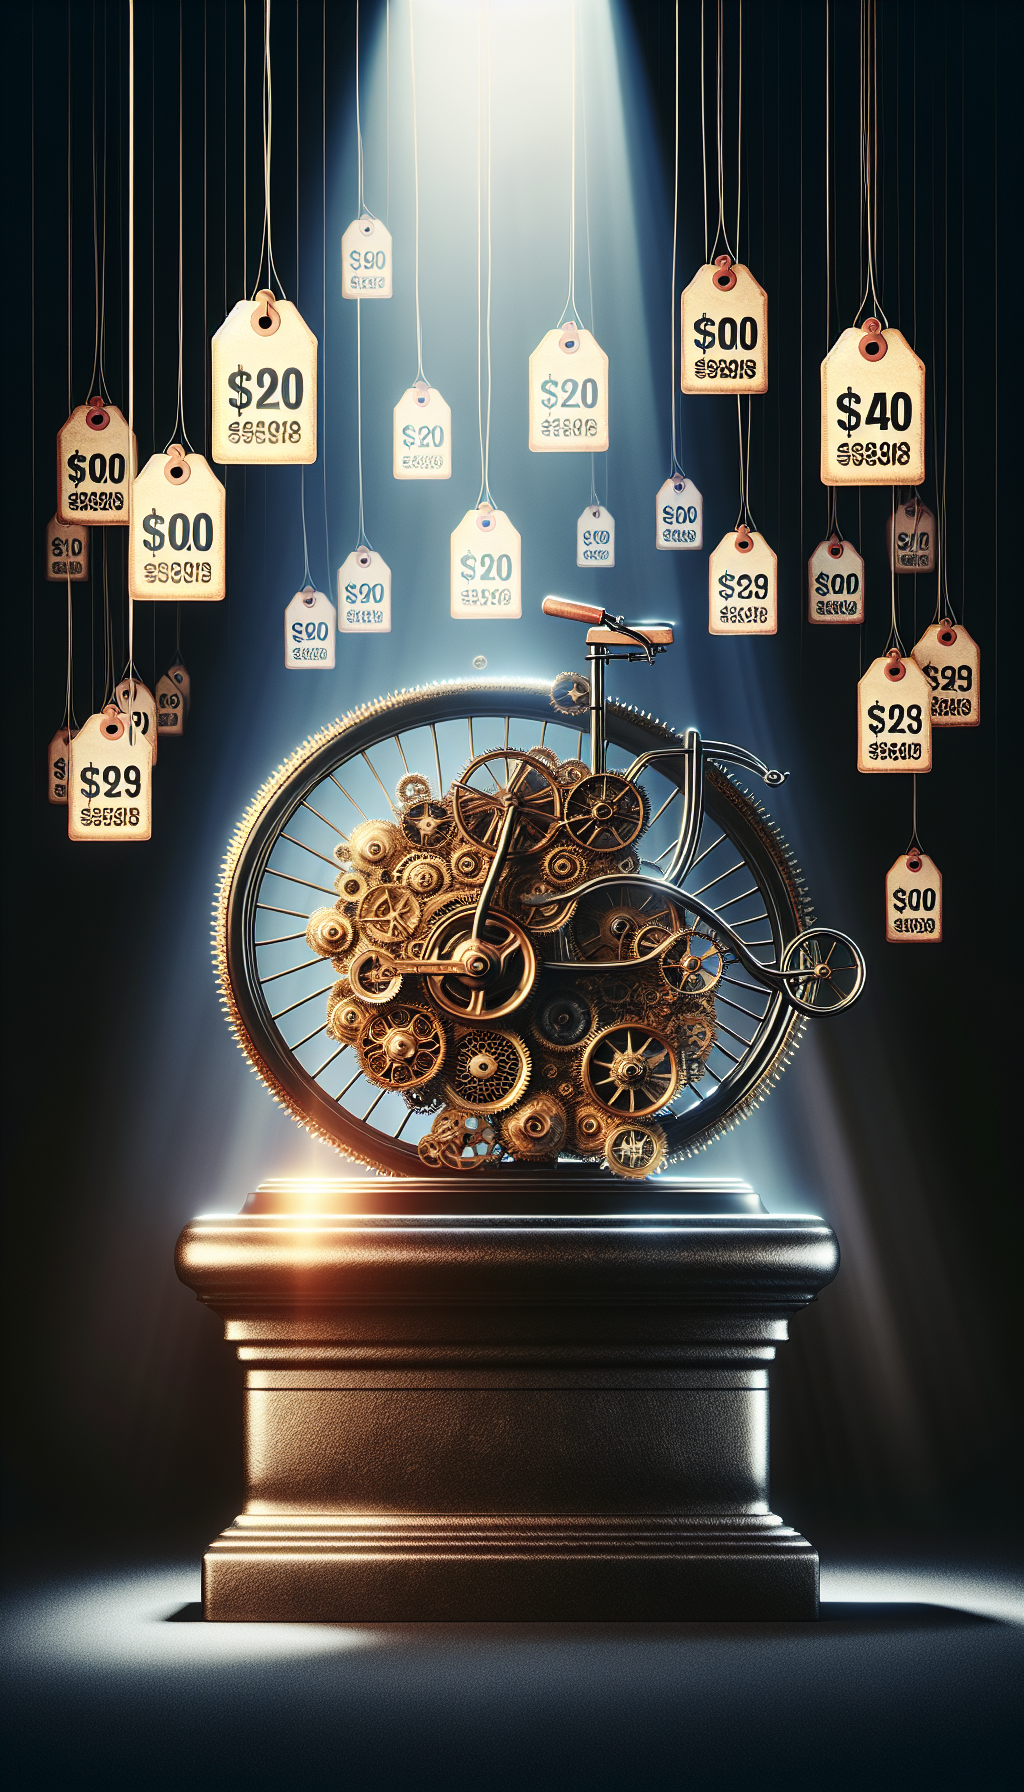 The illustration depicts a gleaming antique tricycle showcased on a pedestal, with rays of light casting spotlights upon it. It's framed by an intricate gear border, symbolizing its vintage value, and in the background, whimsical price tags float like balloons, each tag inscribed with hefty sums, subtly reflecting the high market values of these rare collectibles.